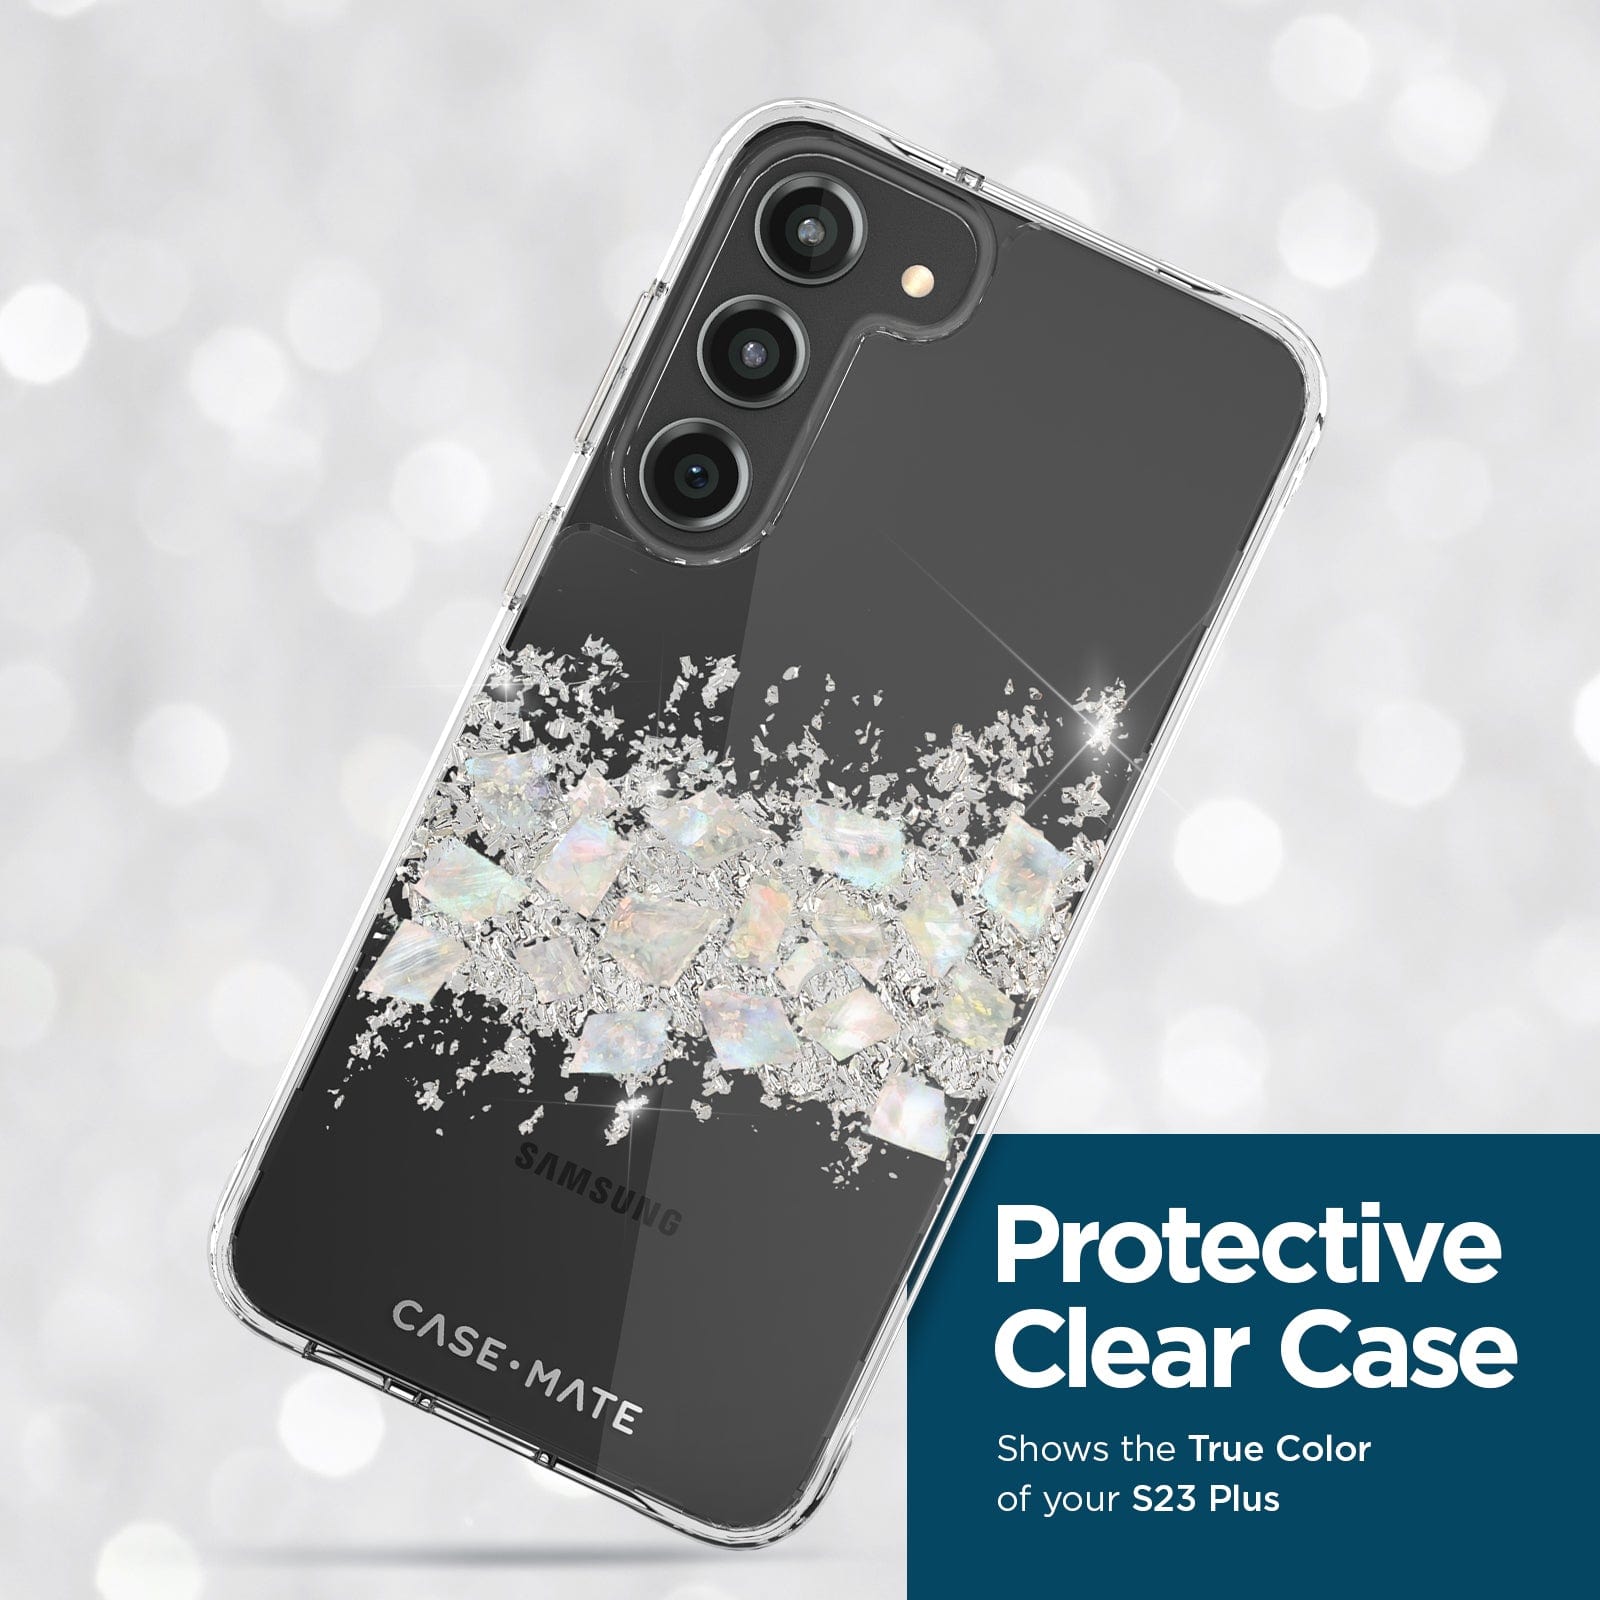 PROTECTIVE CLEAR CASE. SHOWS THE TRUE COLOR OF YOUR S23+